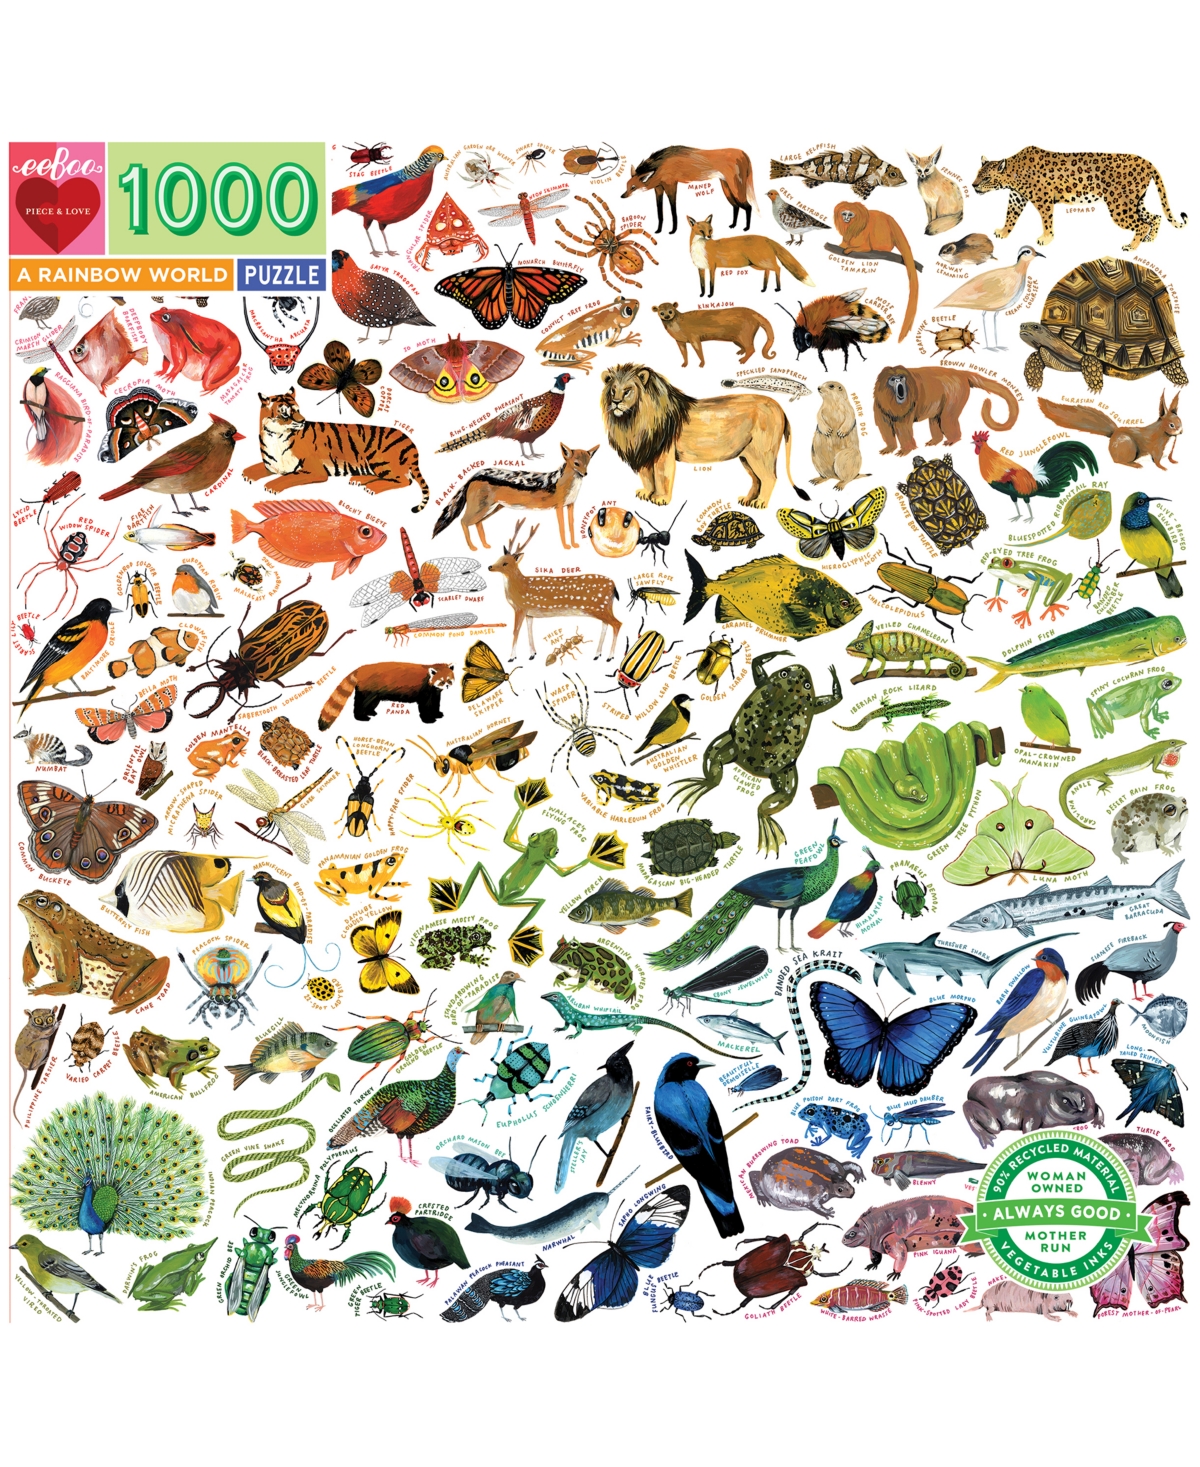 Eeboo Piece And Love A Rainbow World 1000 Piece Square Adult Jigsaw Puzzle Set In Multi